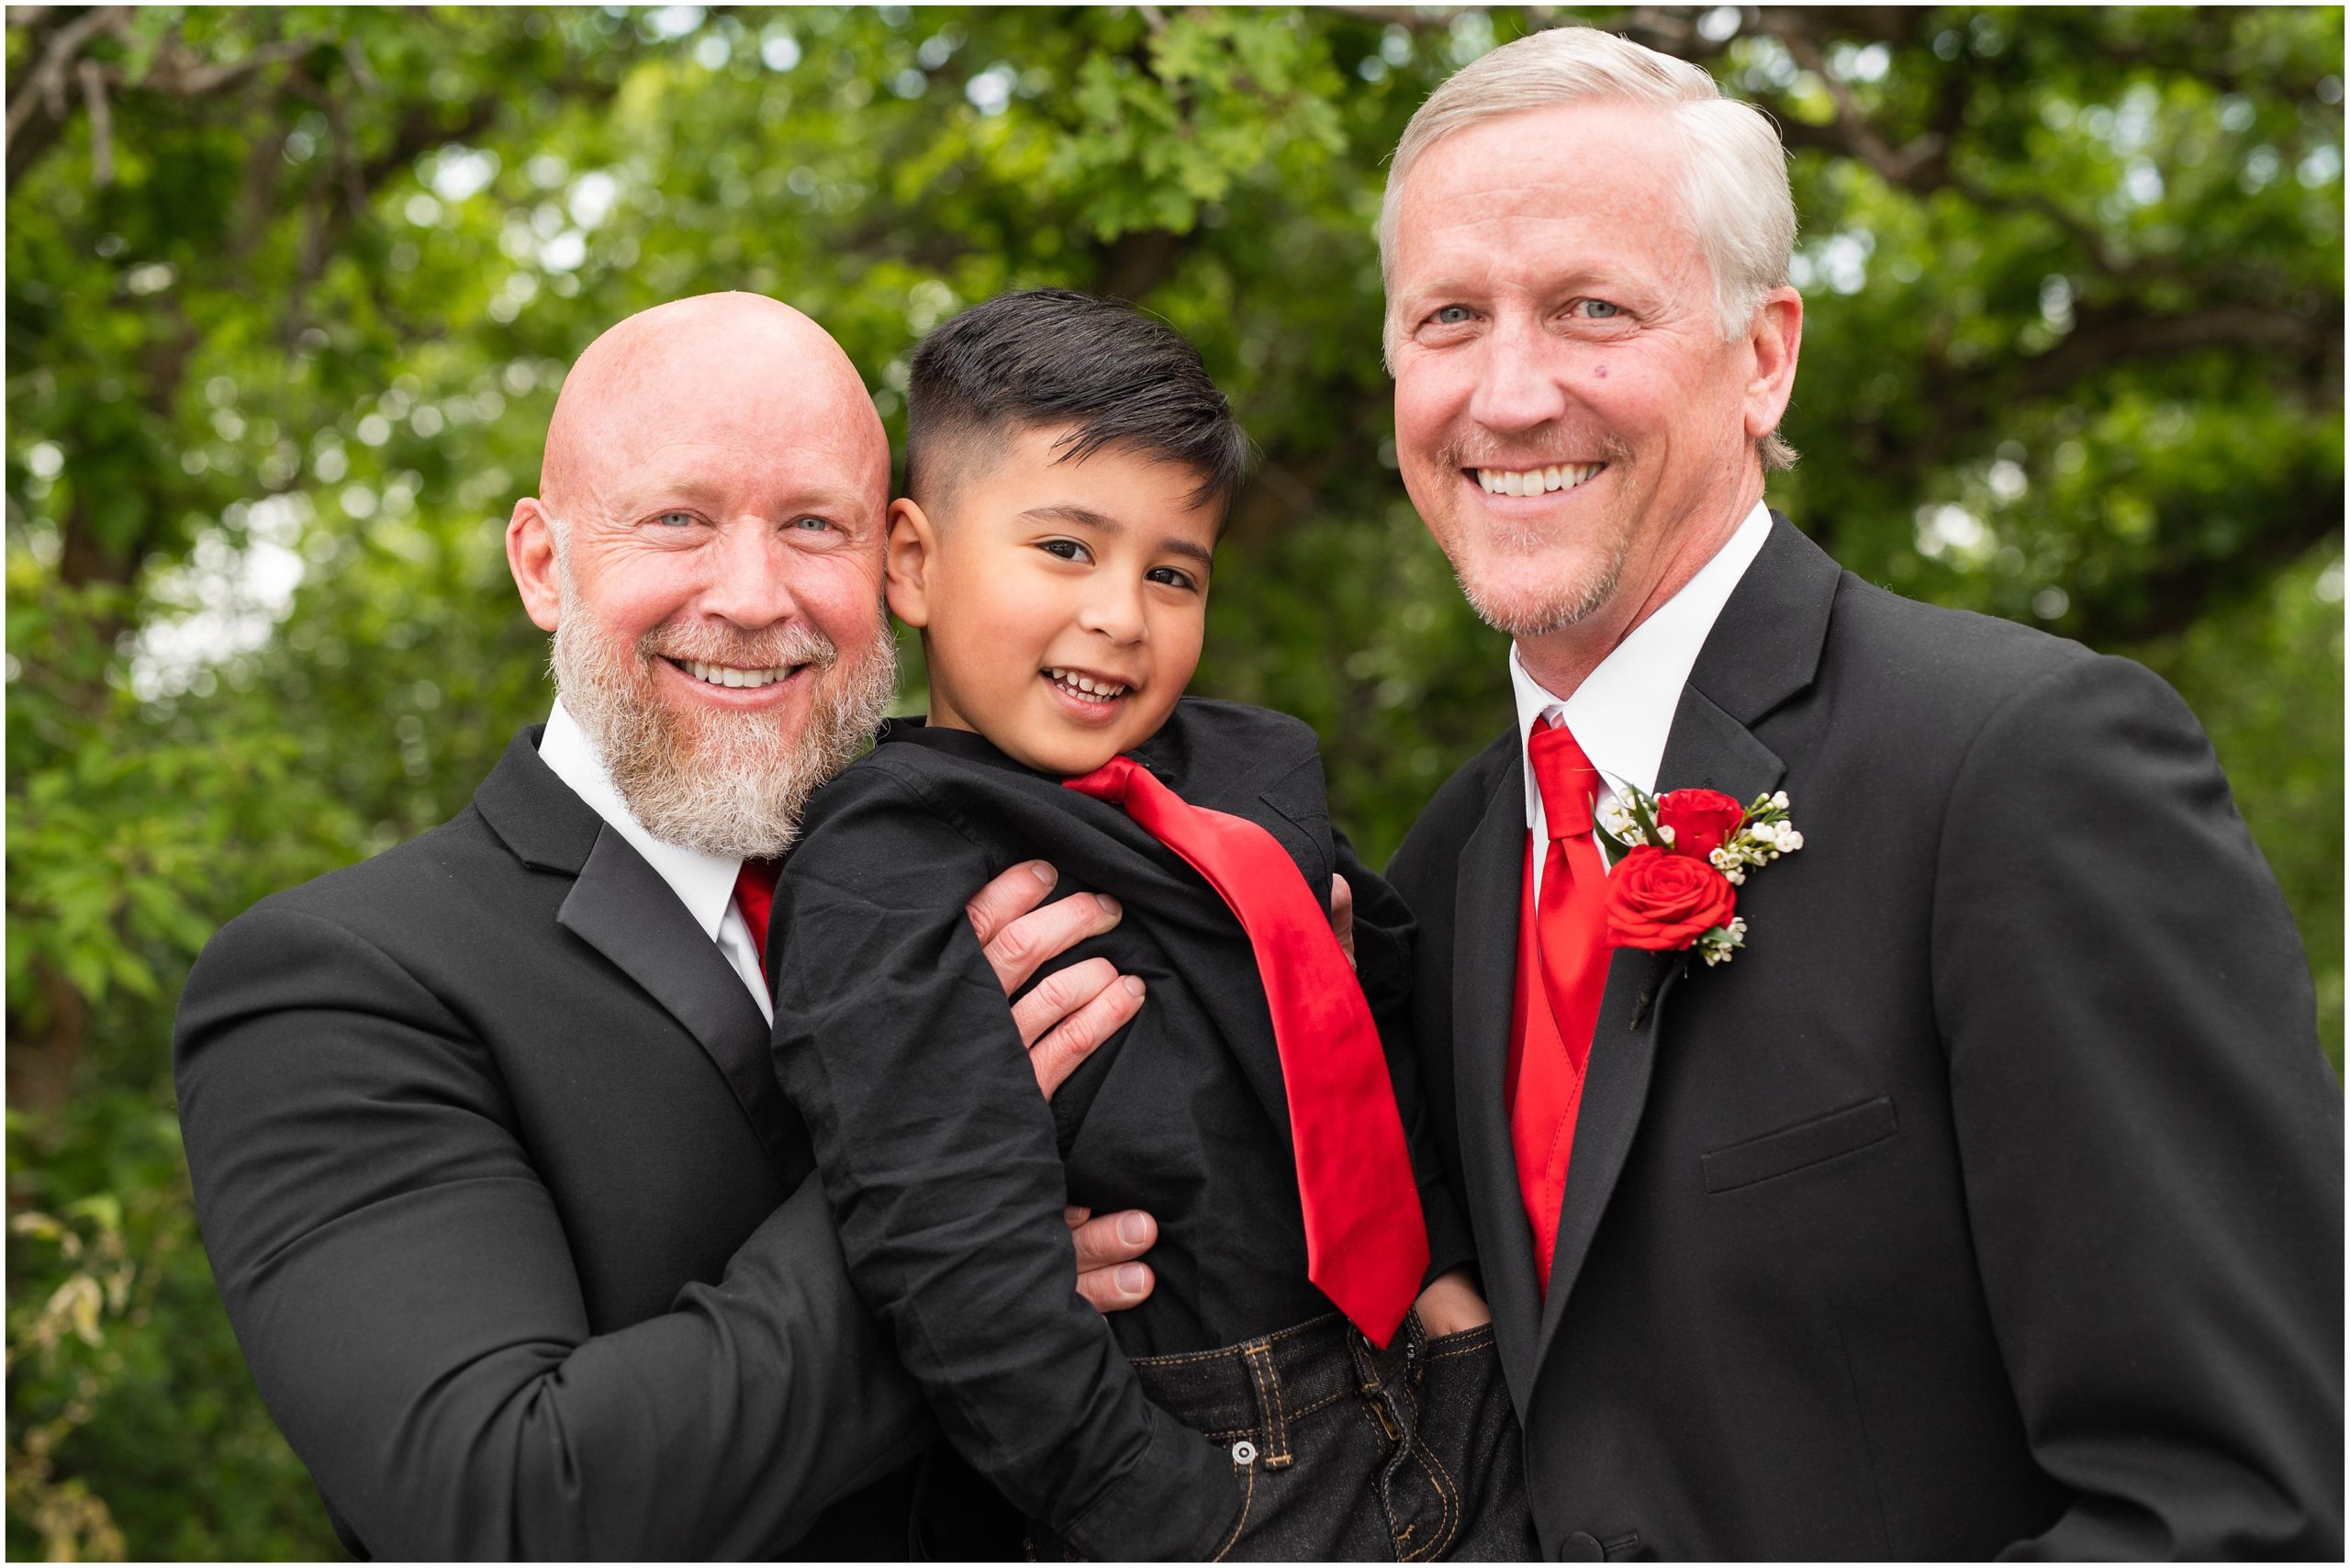 Groom and groomsmen photos with red tie and black suits and University of Utah socks | Red and Black Oak Hills Utah Spring Wedding | Jessie and Dallin Photography